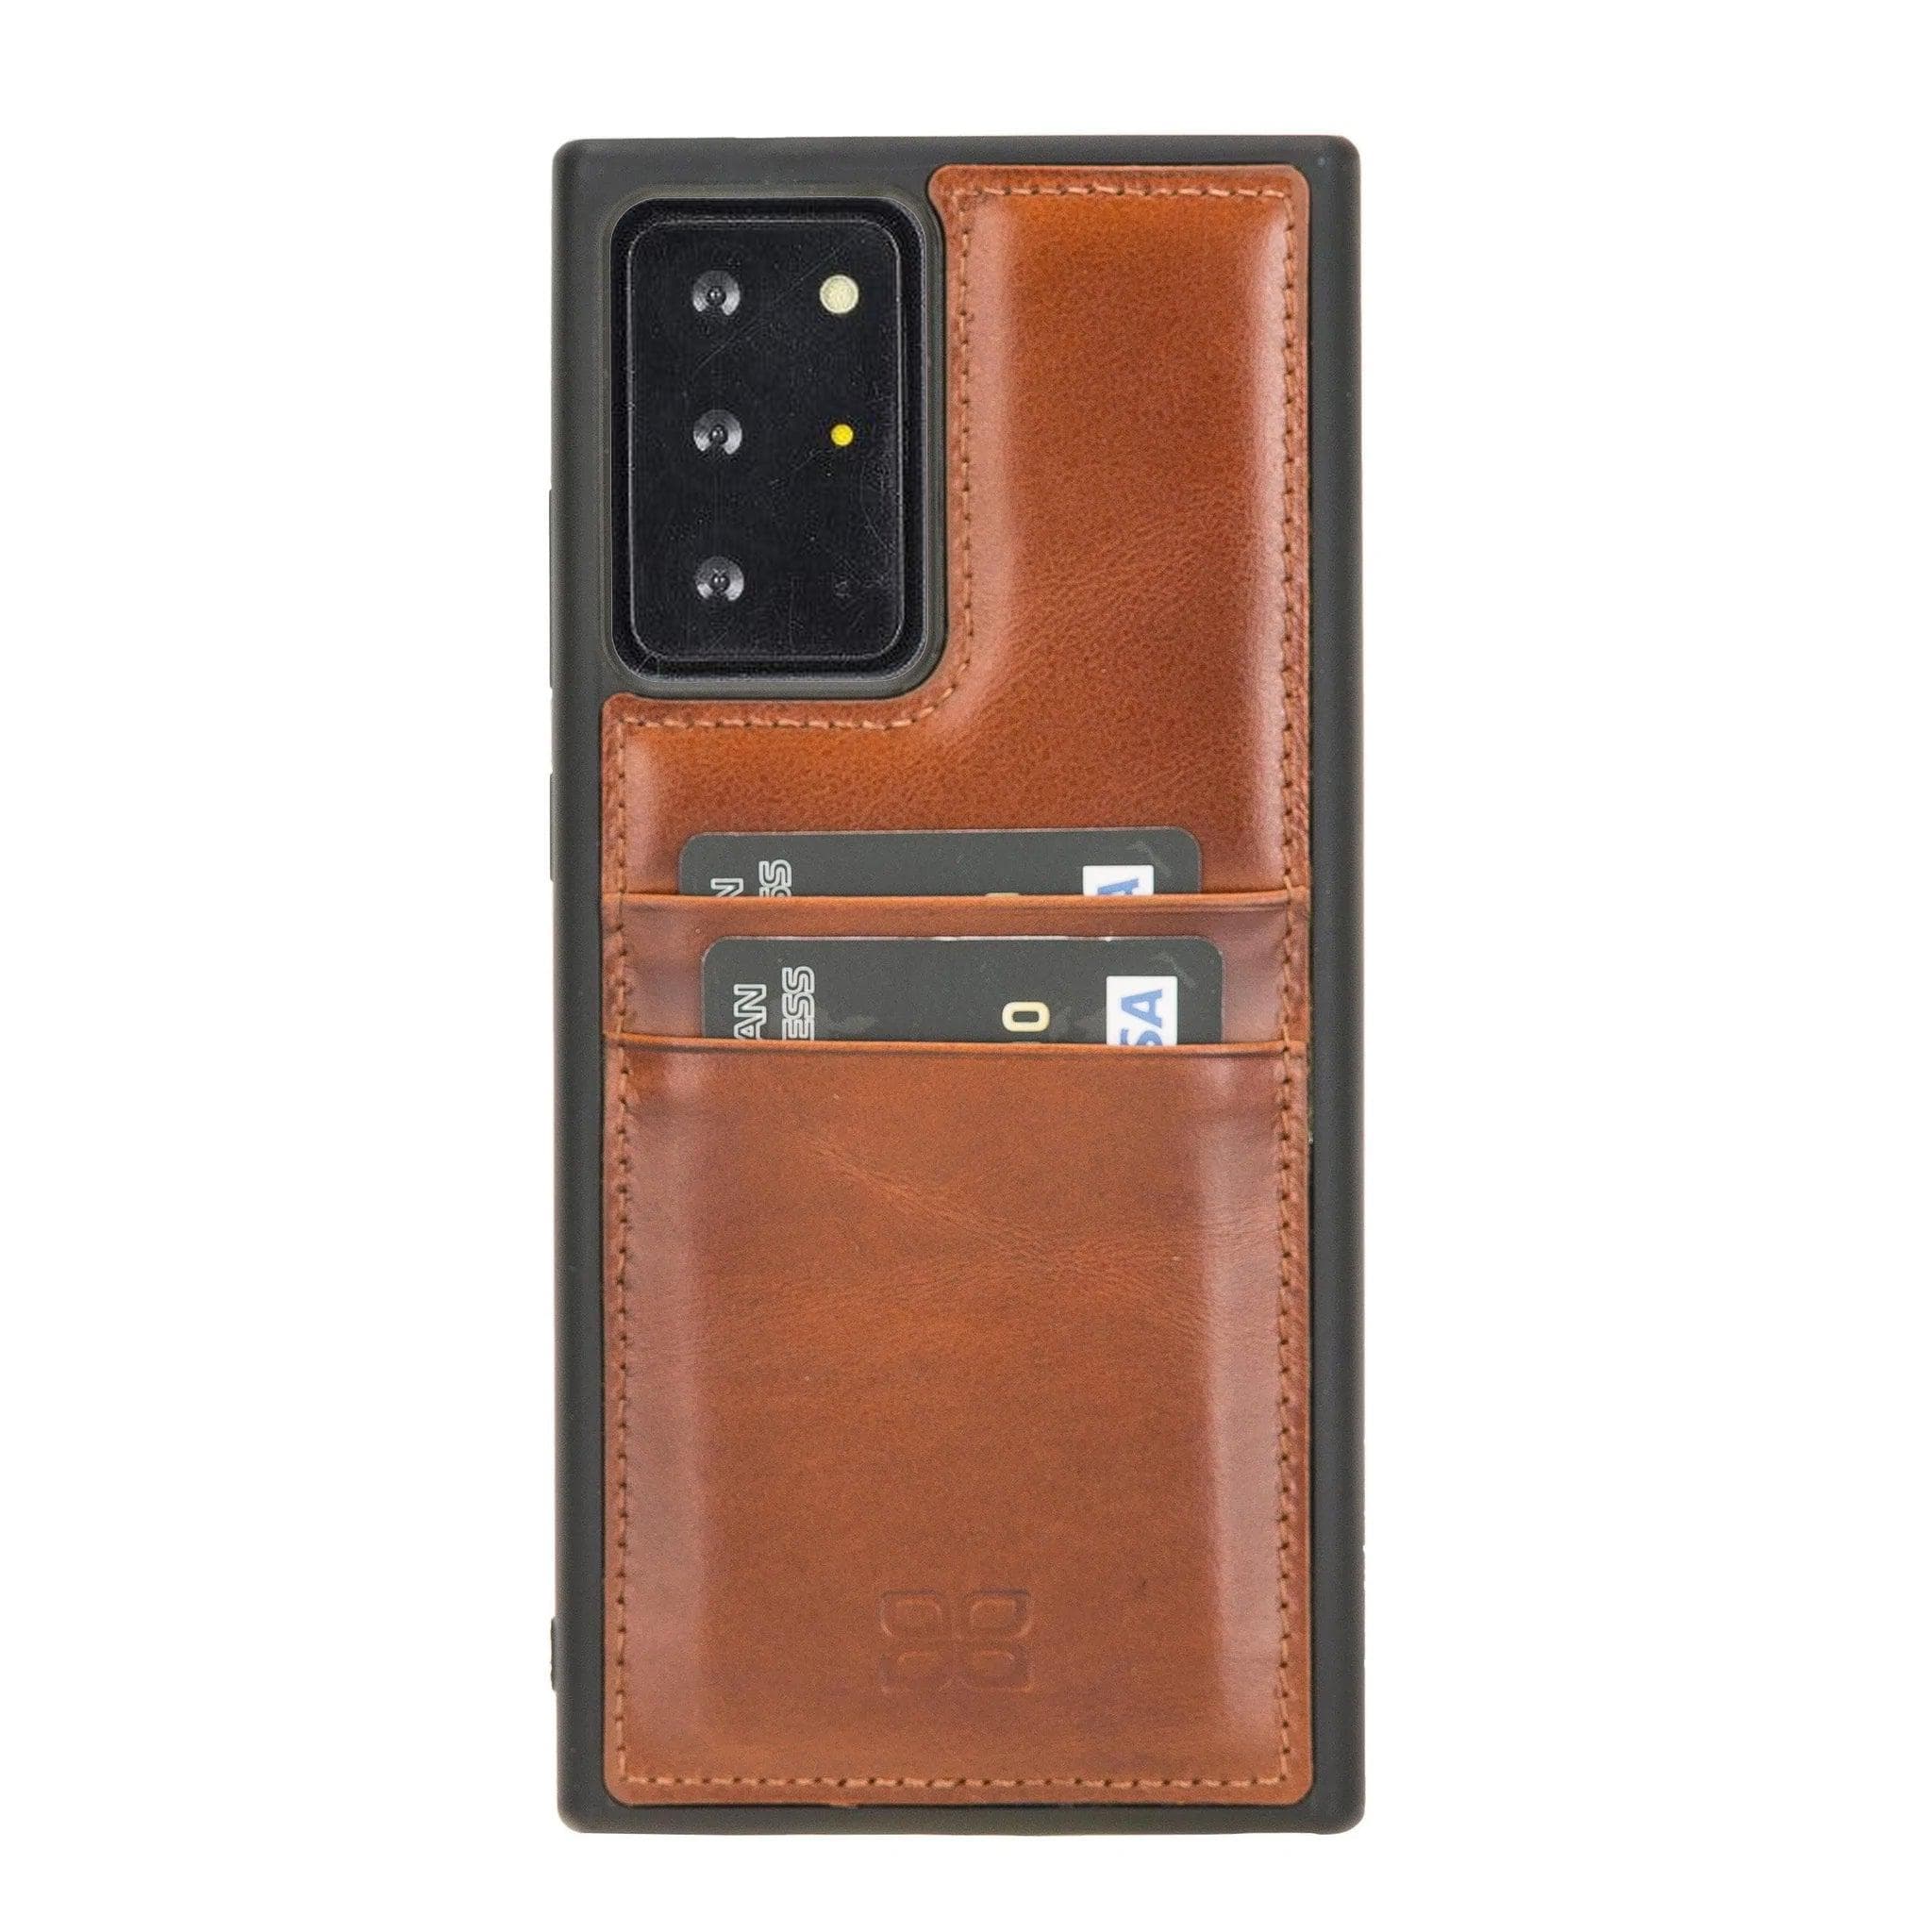 Bouletta Samsung Note 20 Series Leather Back Cover With Card Holder Note 20 / Tan Bouletta LTD